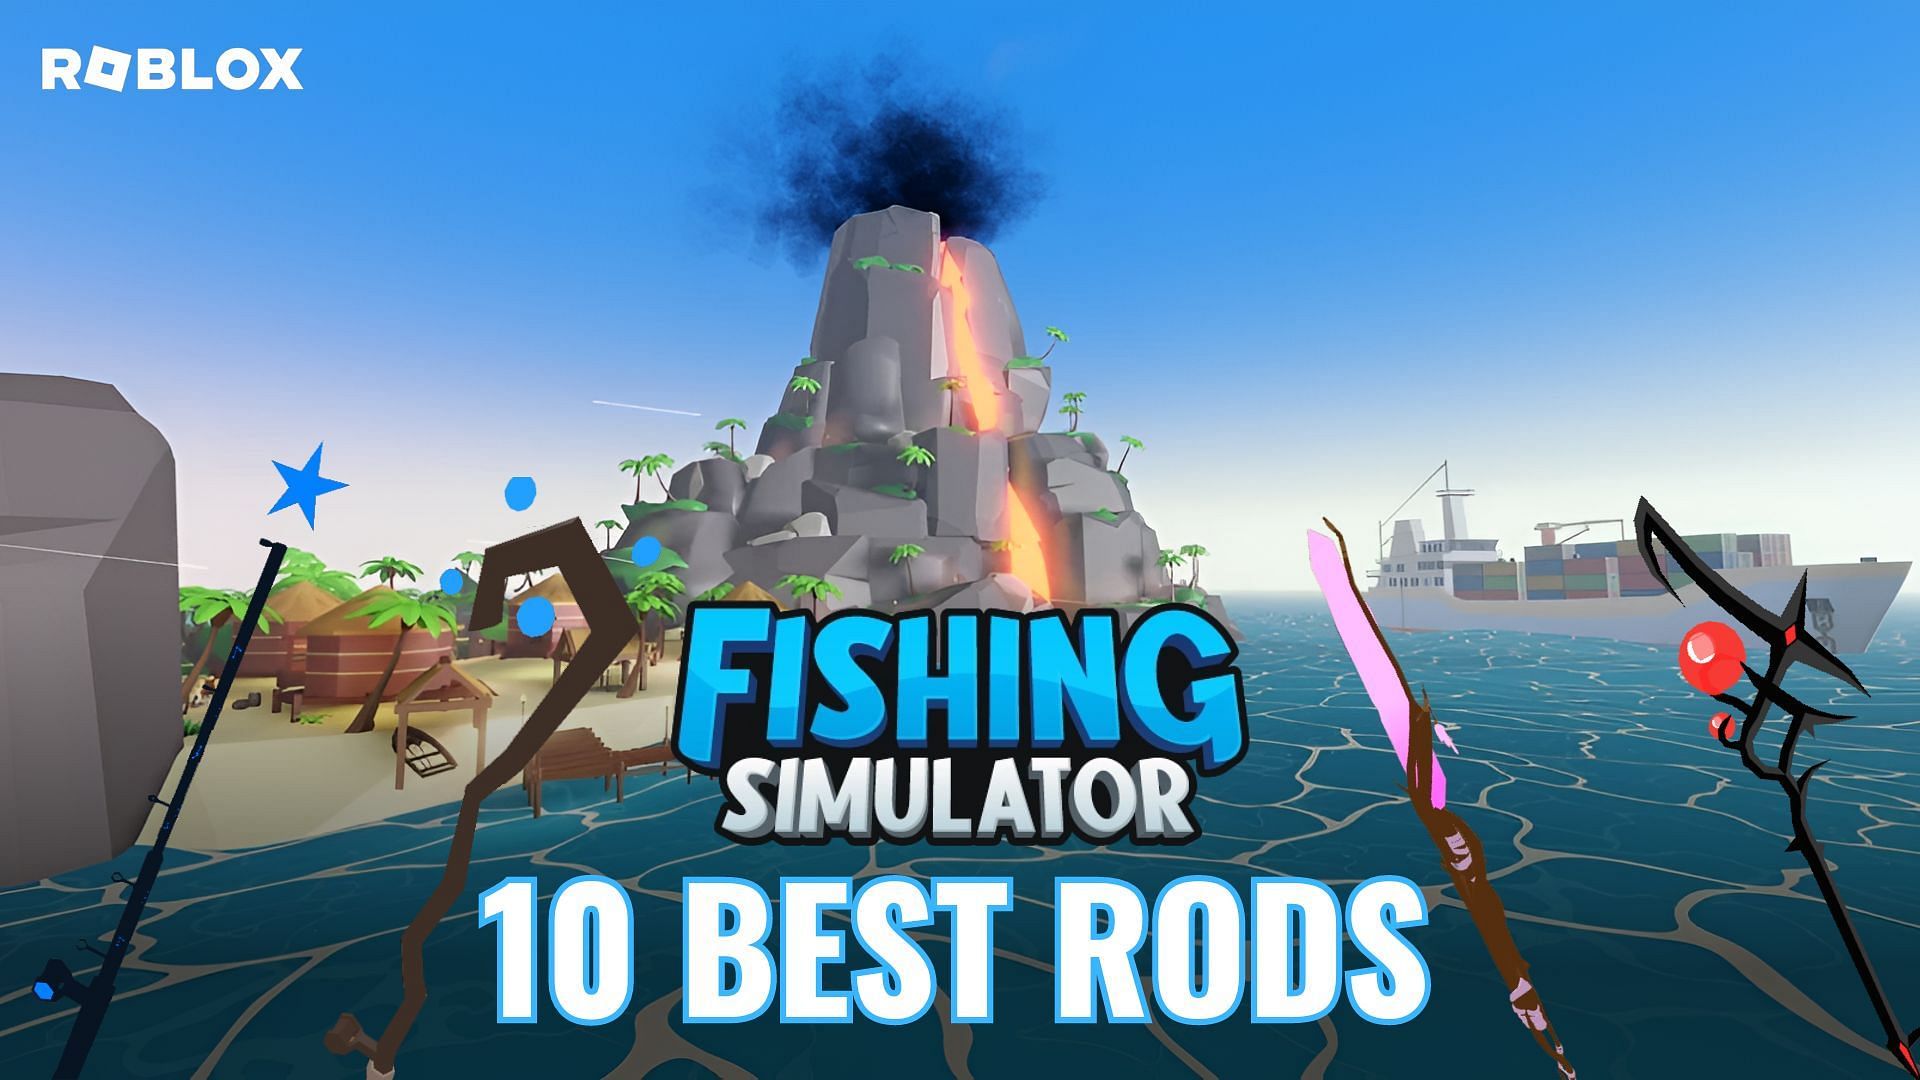 10 best rods in Roblox Fishing Simulator